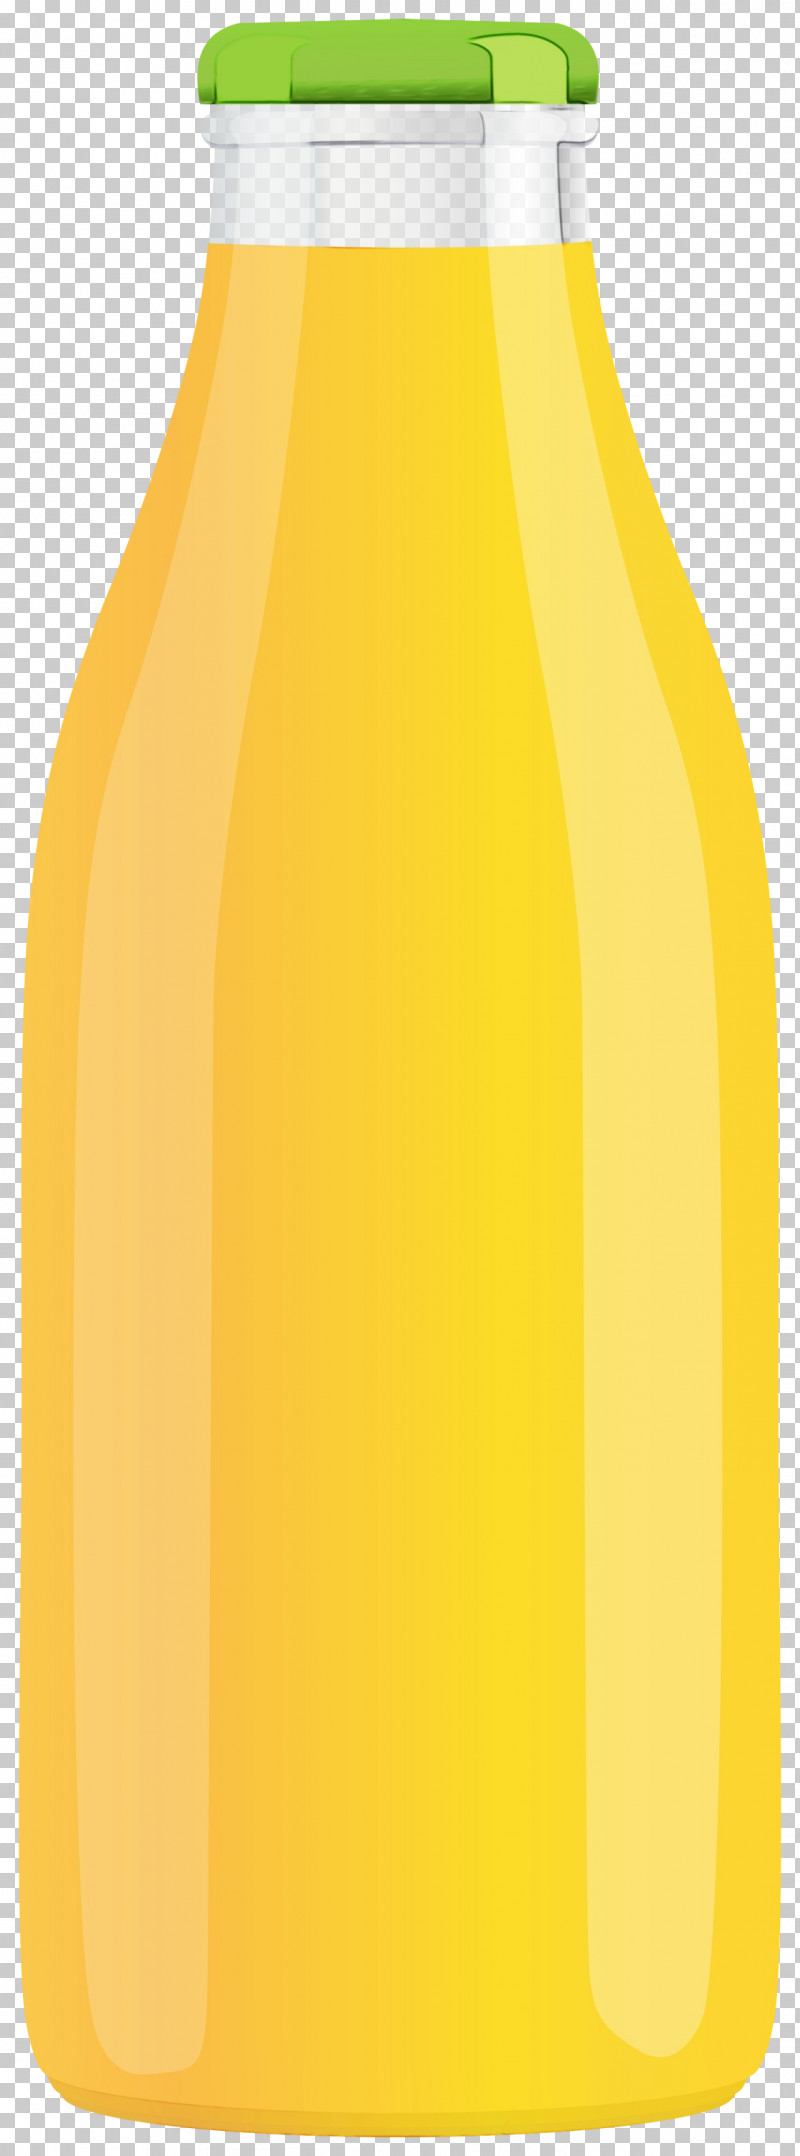 Glass Bottle Bottle Yellow Glass Fruit PNG, Clipart, Bottle, Fruit, Glass, Glass Bottle, Paint Free PNG Download